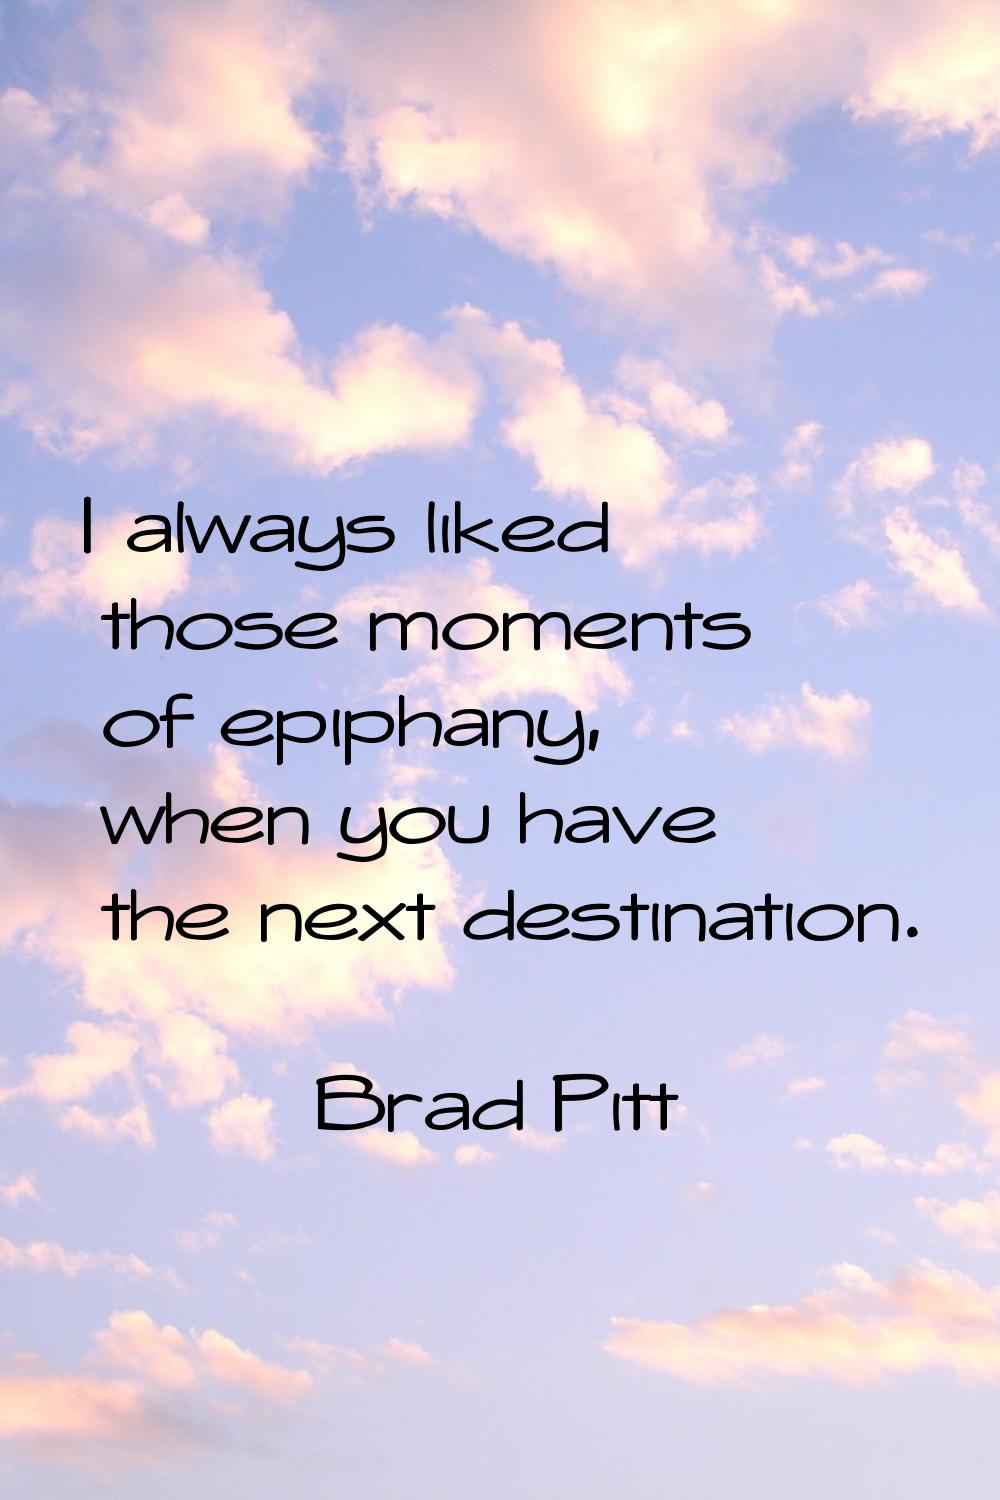 I always liked those moments of epiphany, when you have the next destination.